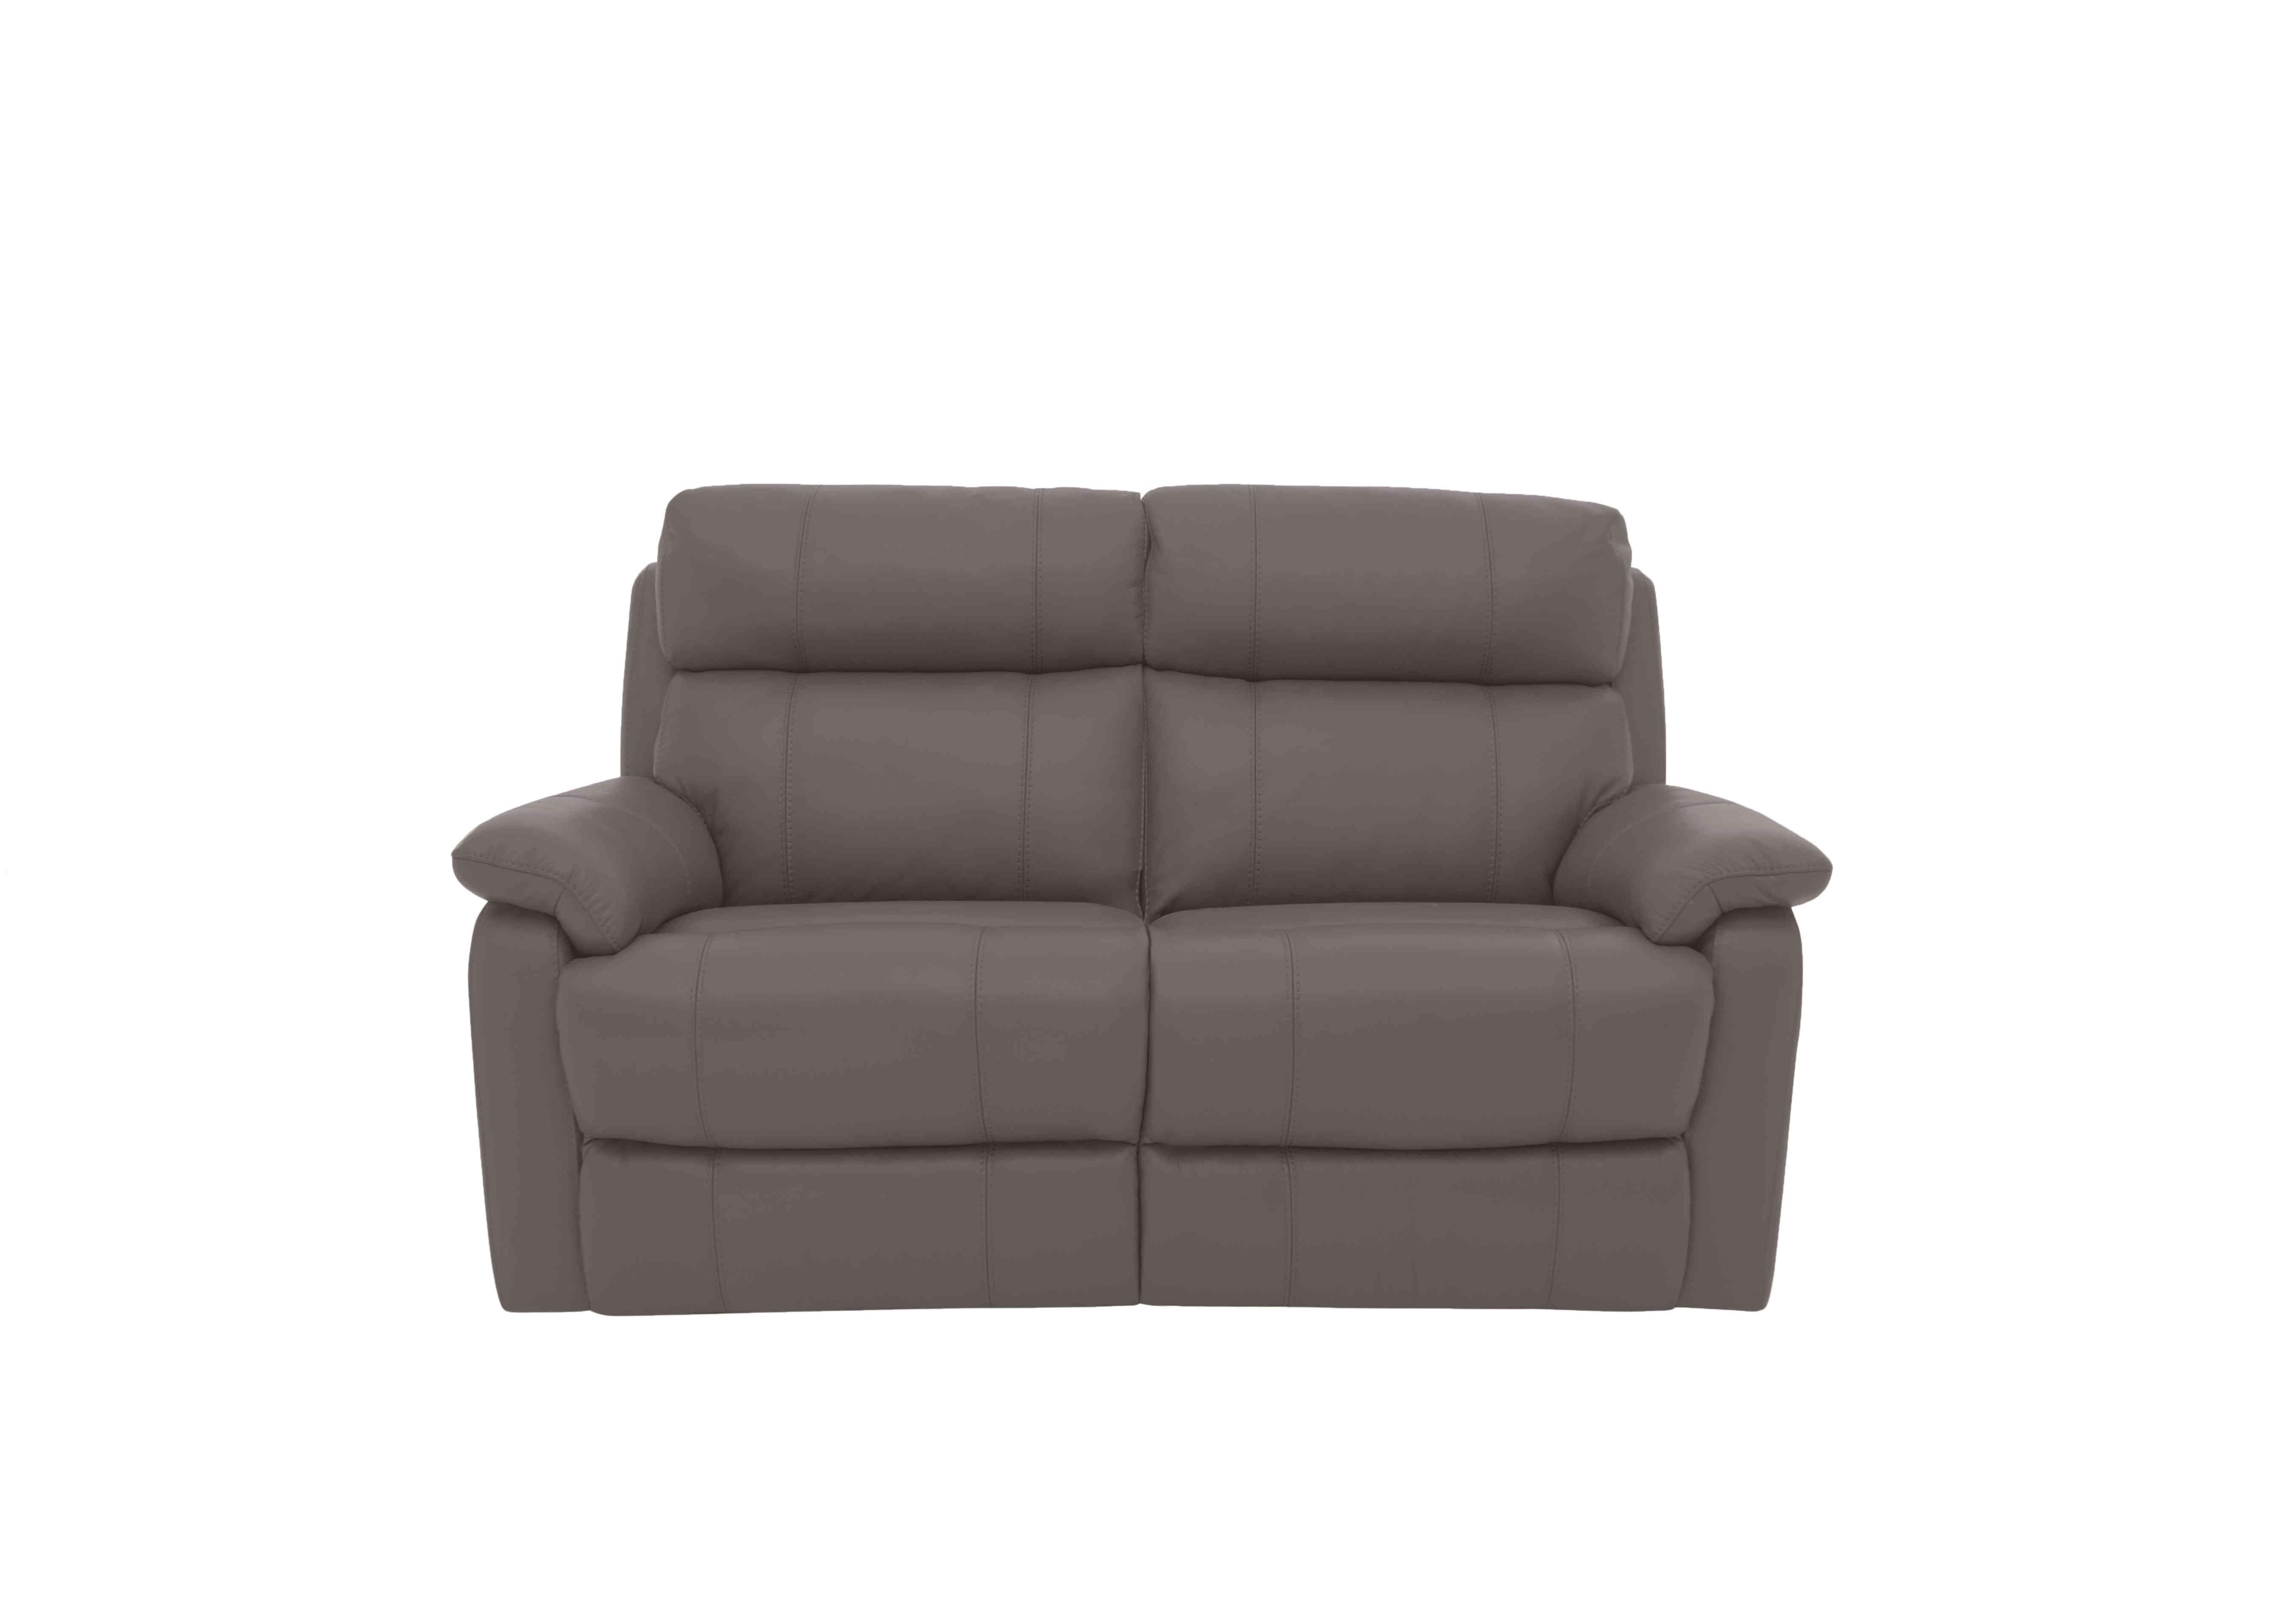 Relax Station Komodo 2 Seater Power Leather Sofa in Nc-042e Elephant on Furniture Village